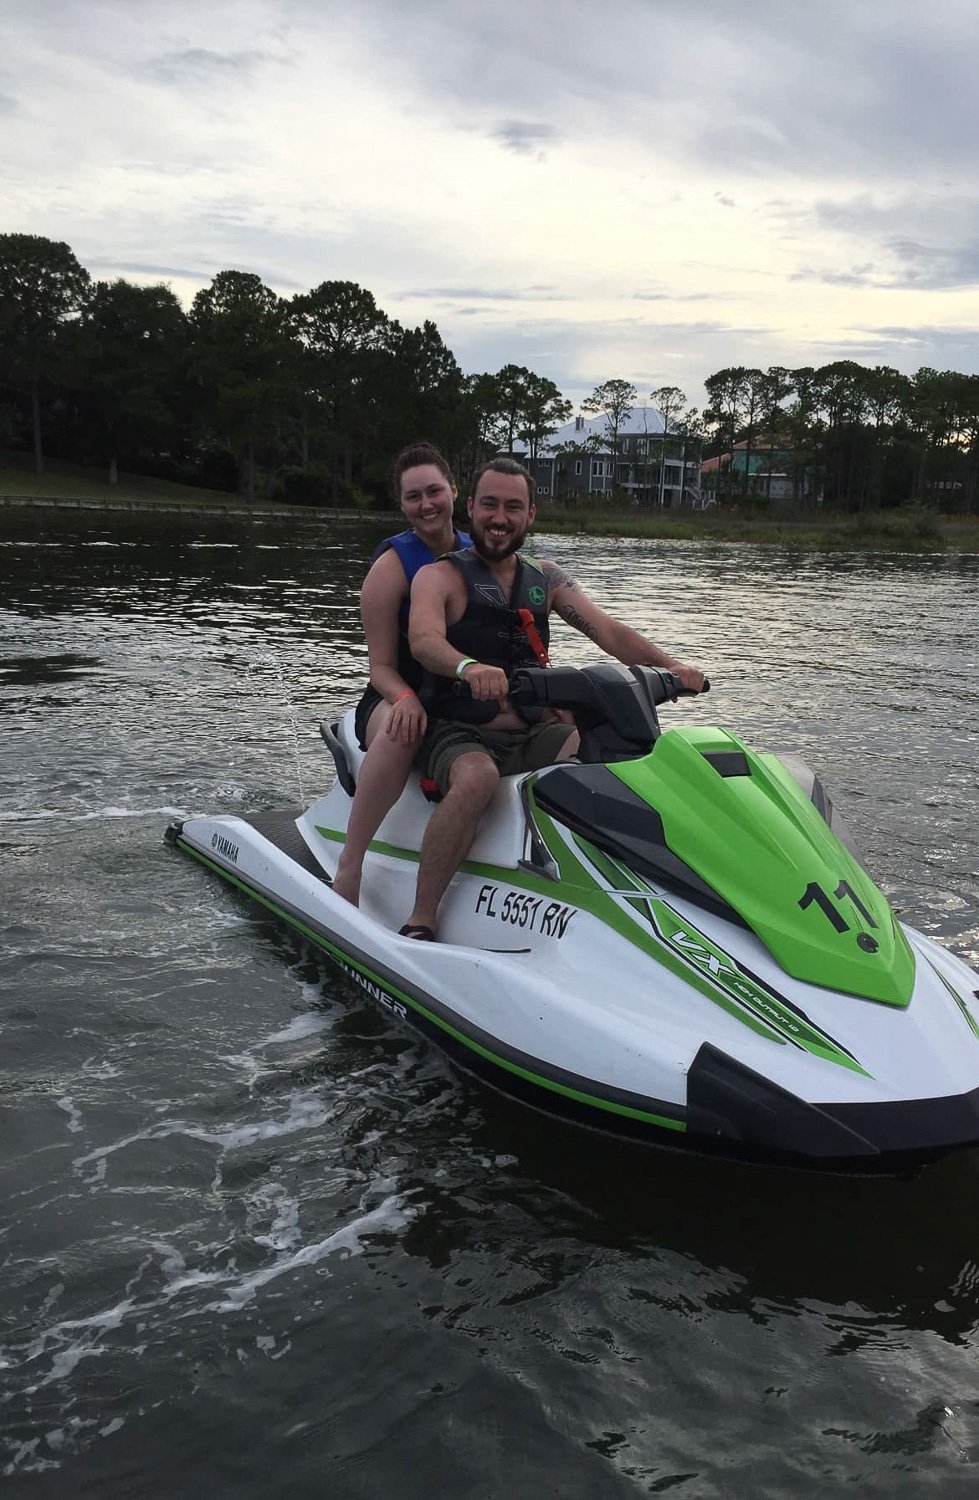 A couple sitting on a jet ski on the water